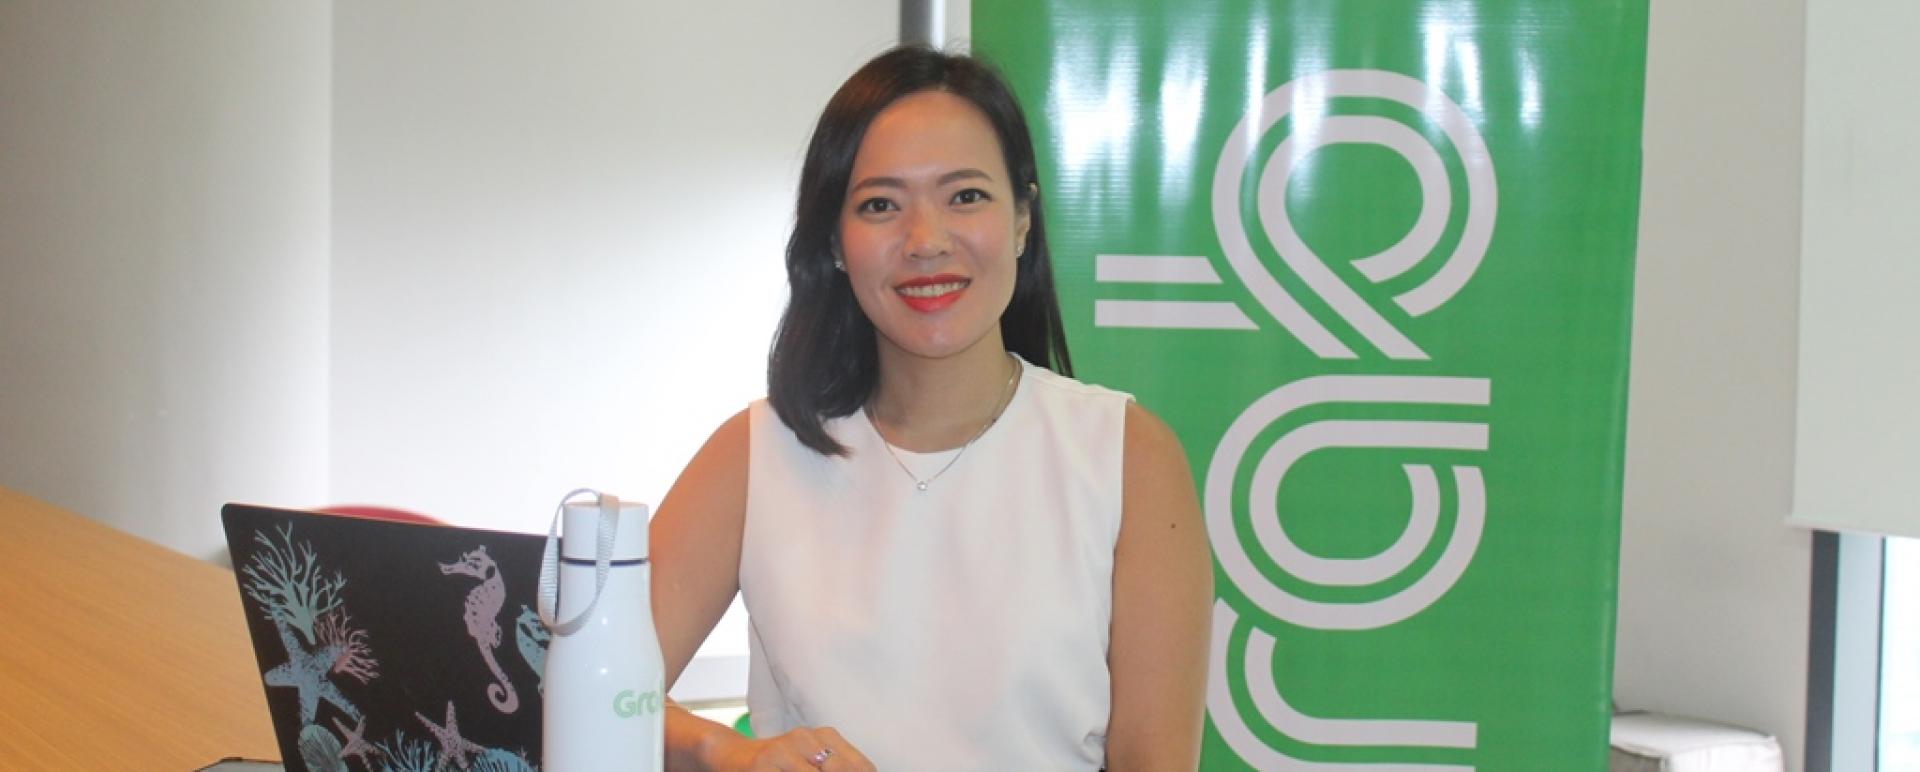 Cindy Toh, Grab's country head for Myanmar, at the firm's office in Yangon (Photo- Khine Kyaw, Myanmar Eleven)